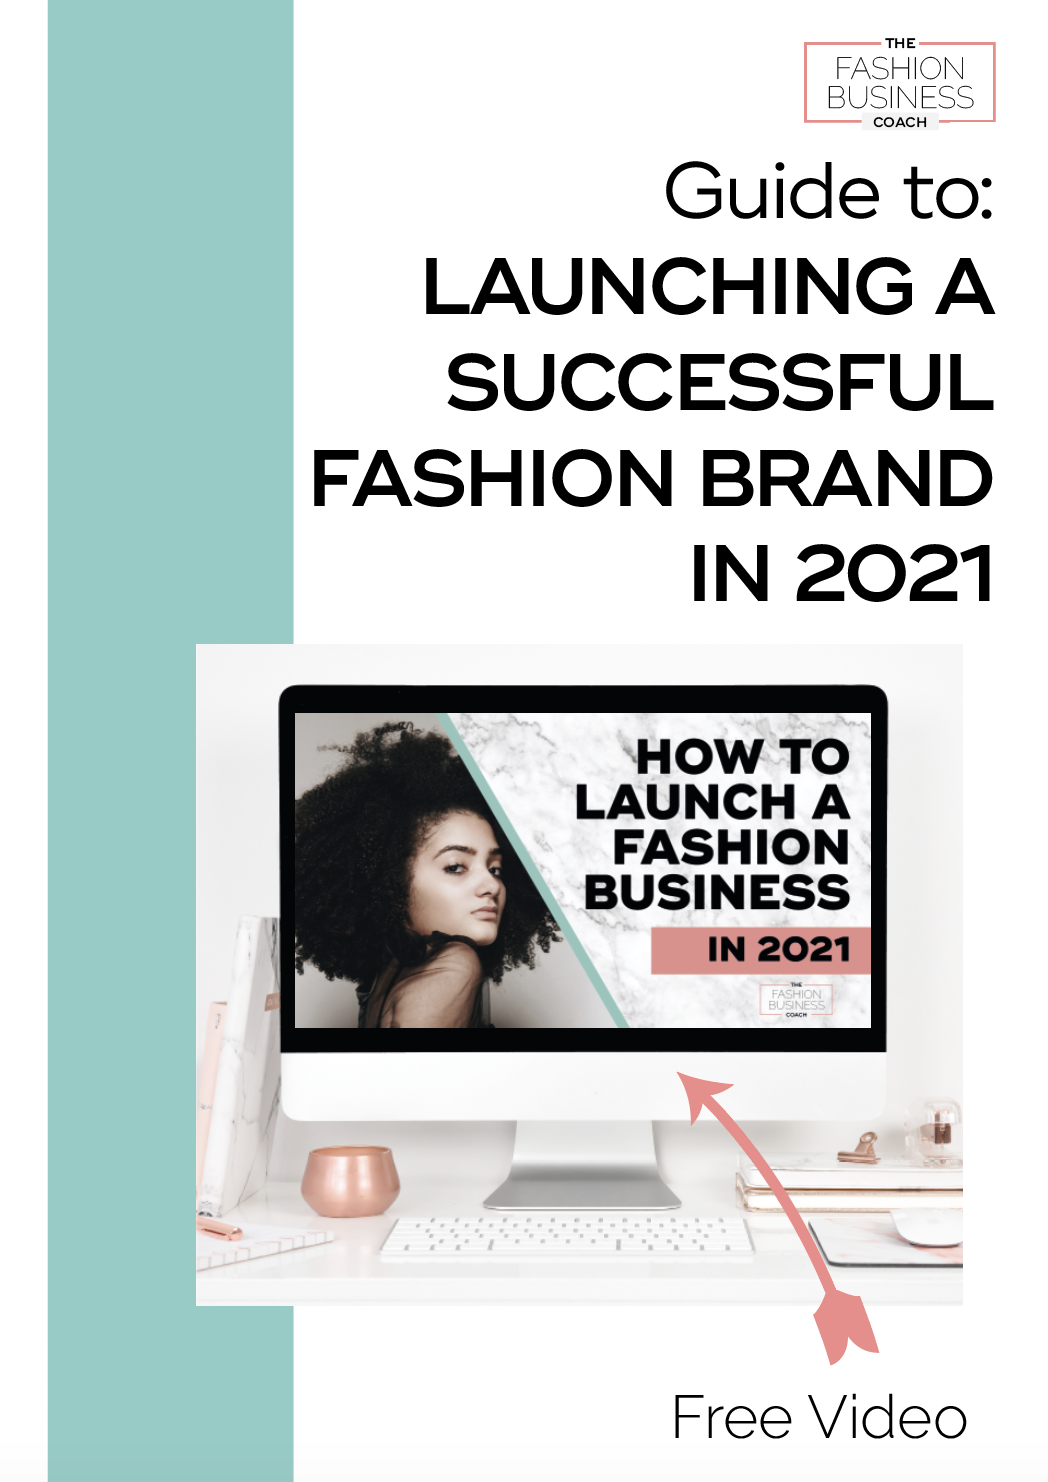 Guide to Launching a Successful Fashion Brand in 2021 4.png